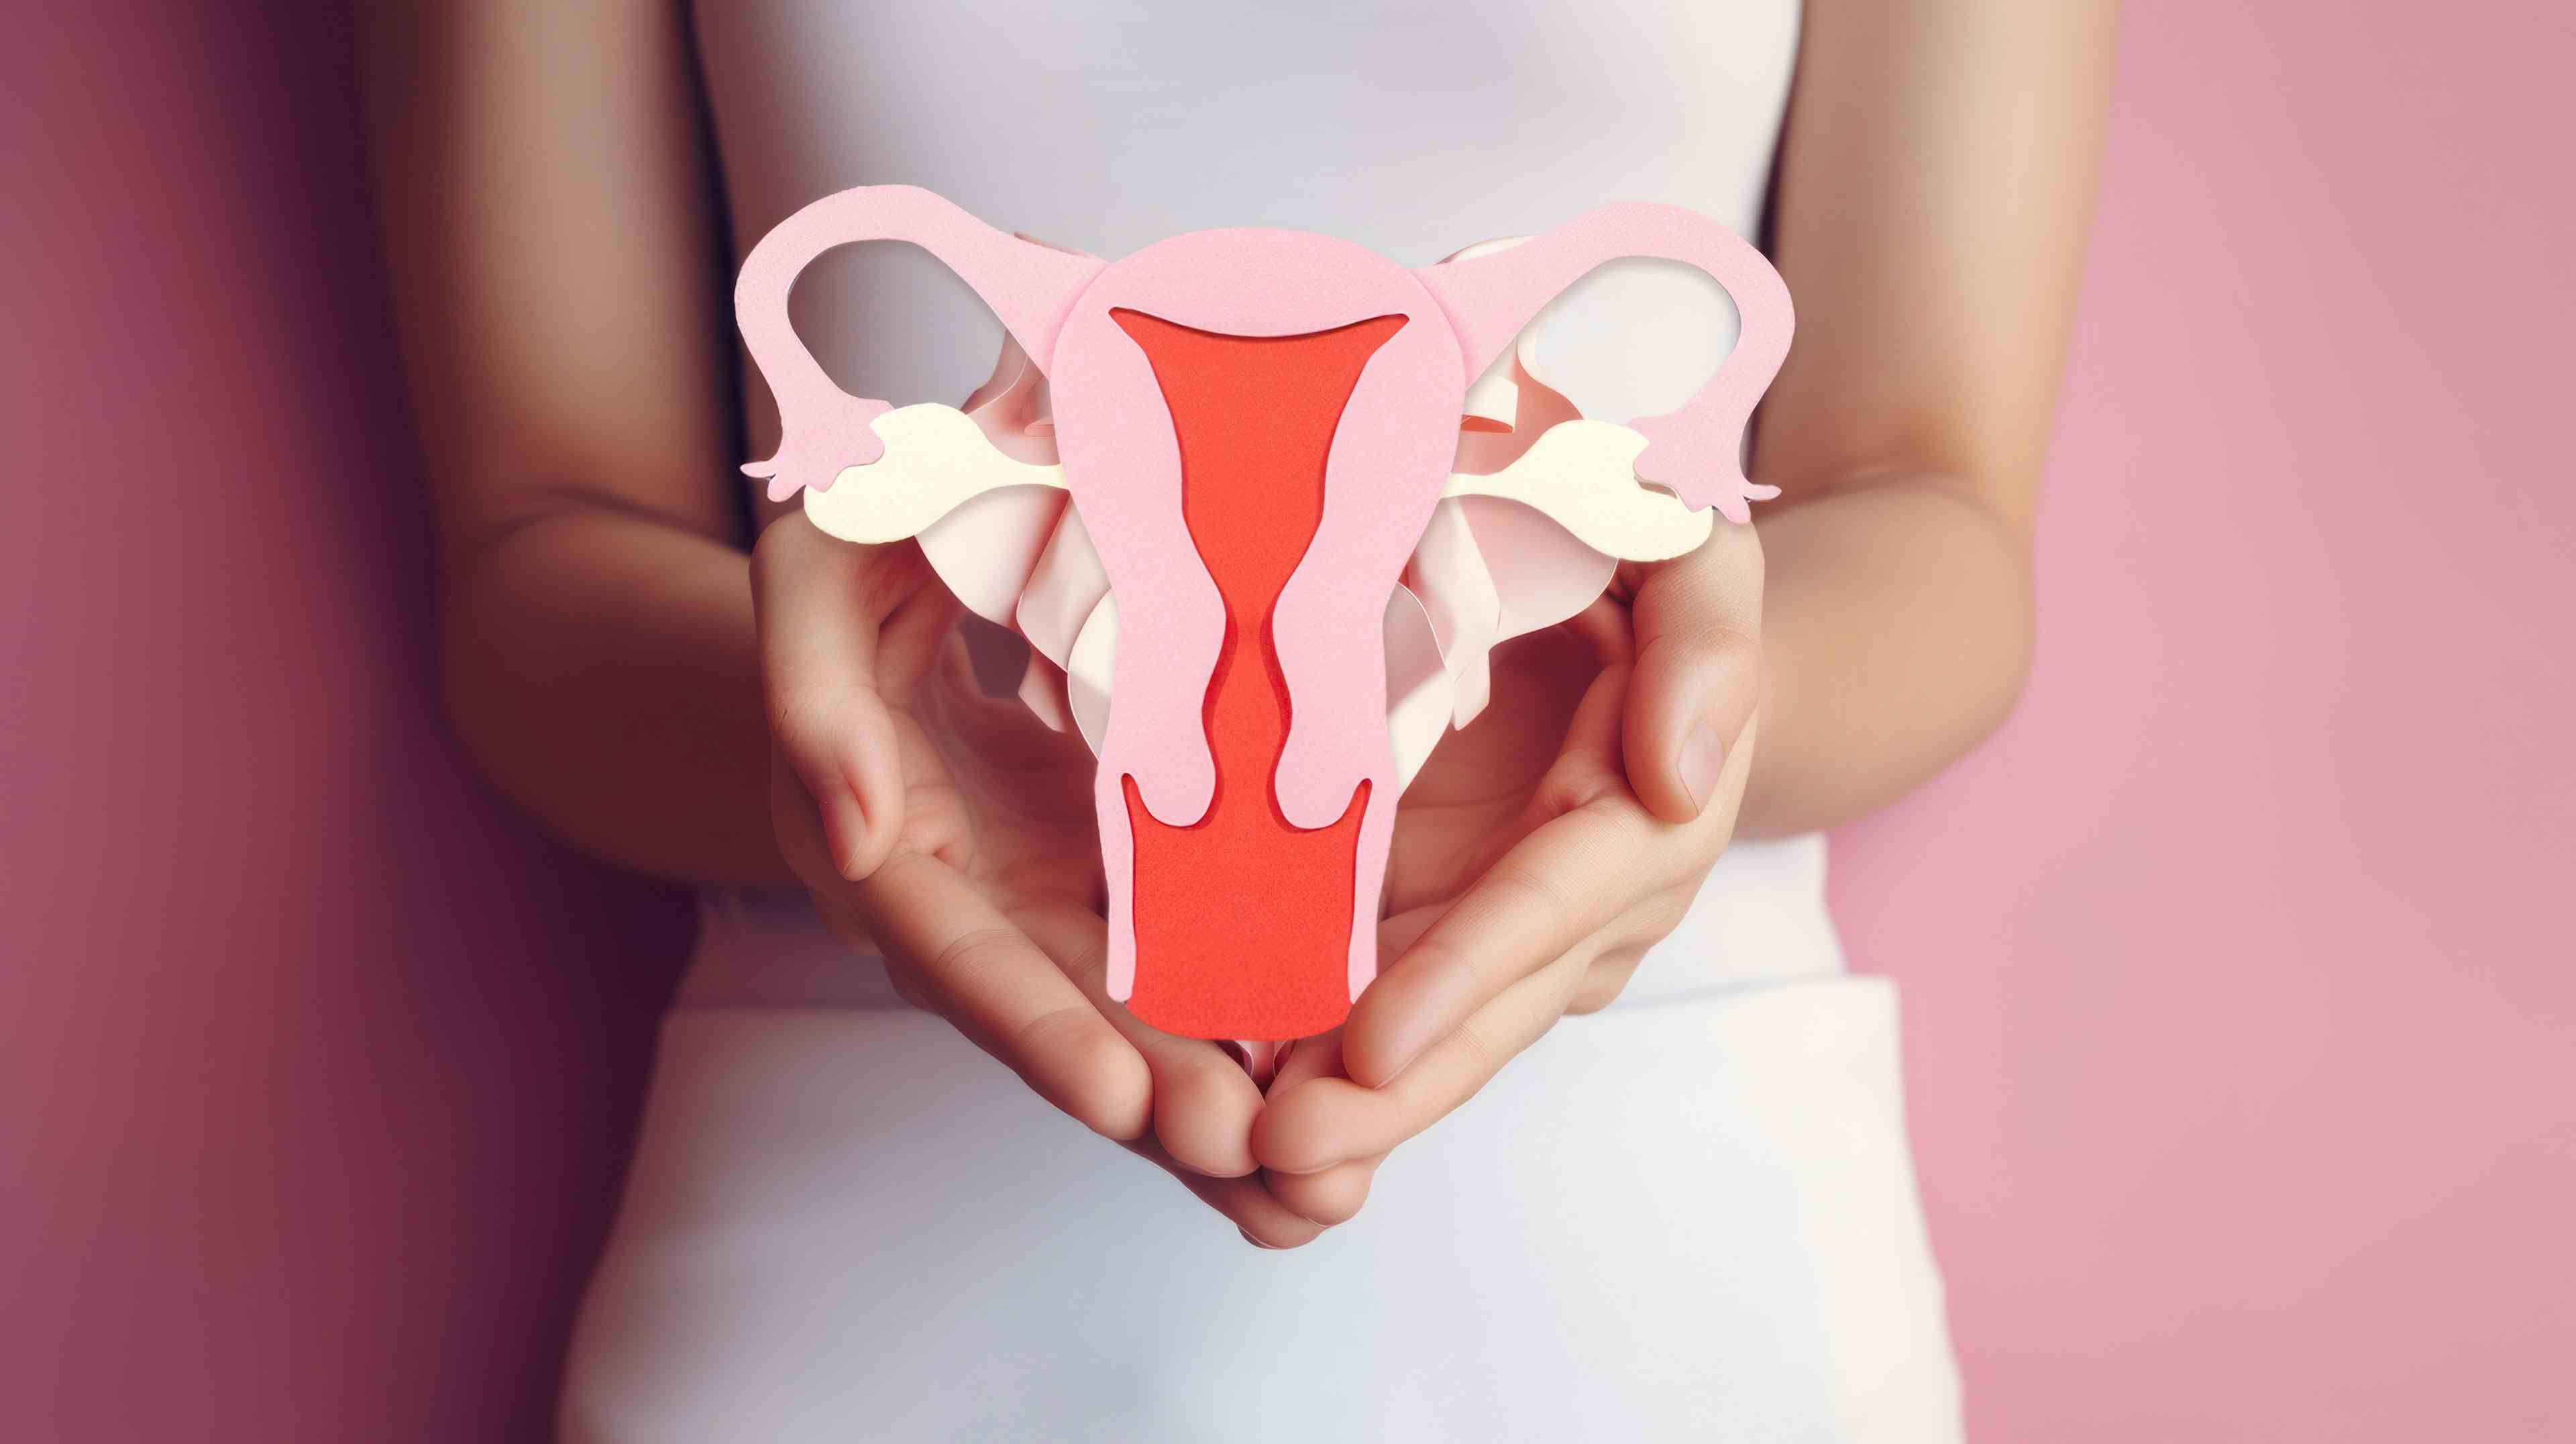 Female reproductive health concept. Woman hand holding uterus shape made frome paper on pink background. Awareness of uterus illness such as endometriosis, PCOS, or gynecologic cancer. GENERATIVE AI - Image credit: Nishihata | stock.adobe.com